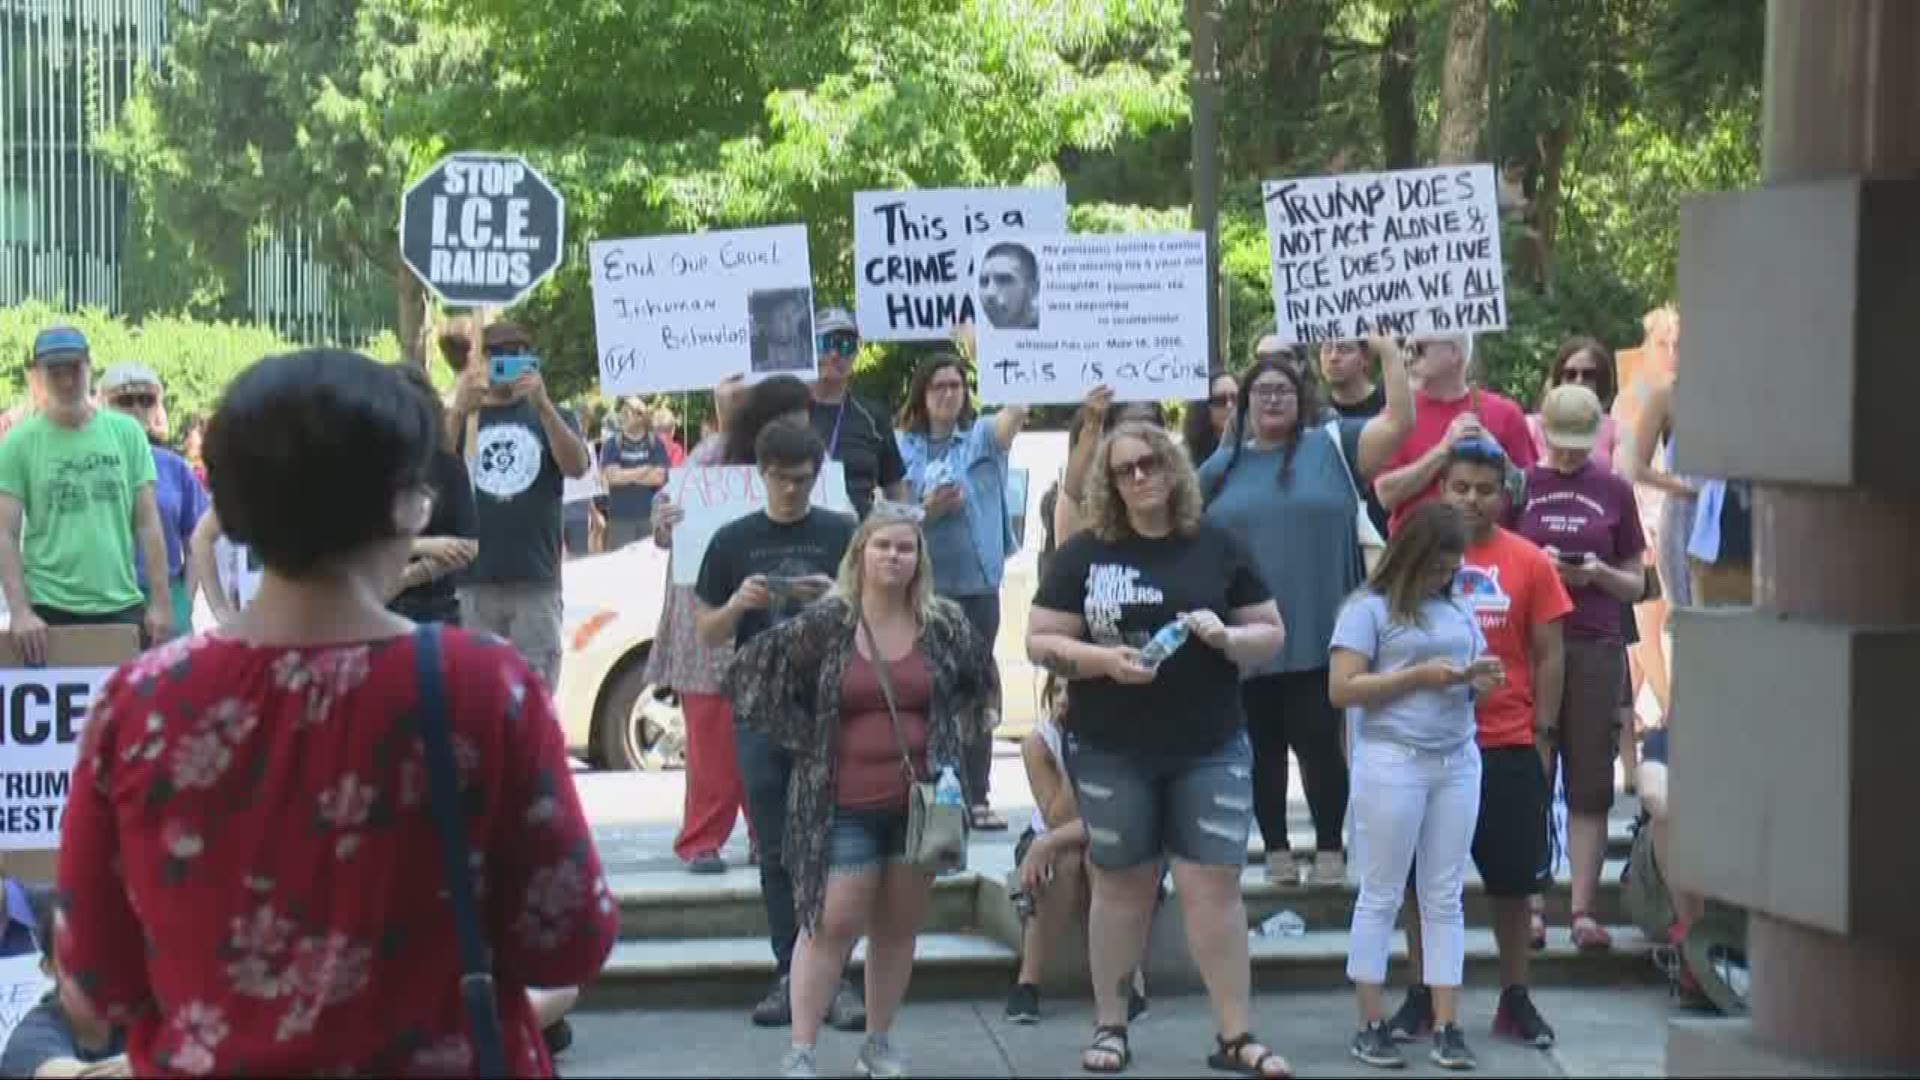 Protesters in Portland gathered for a Sunday protest said it's time to abolish ICE and for the government to reunited families separated near the border.